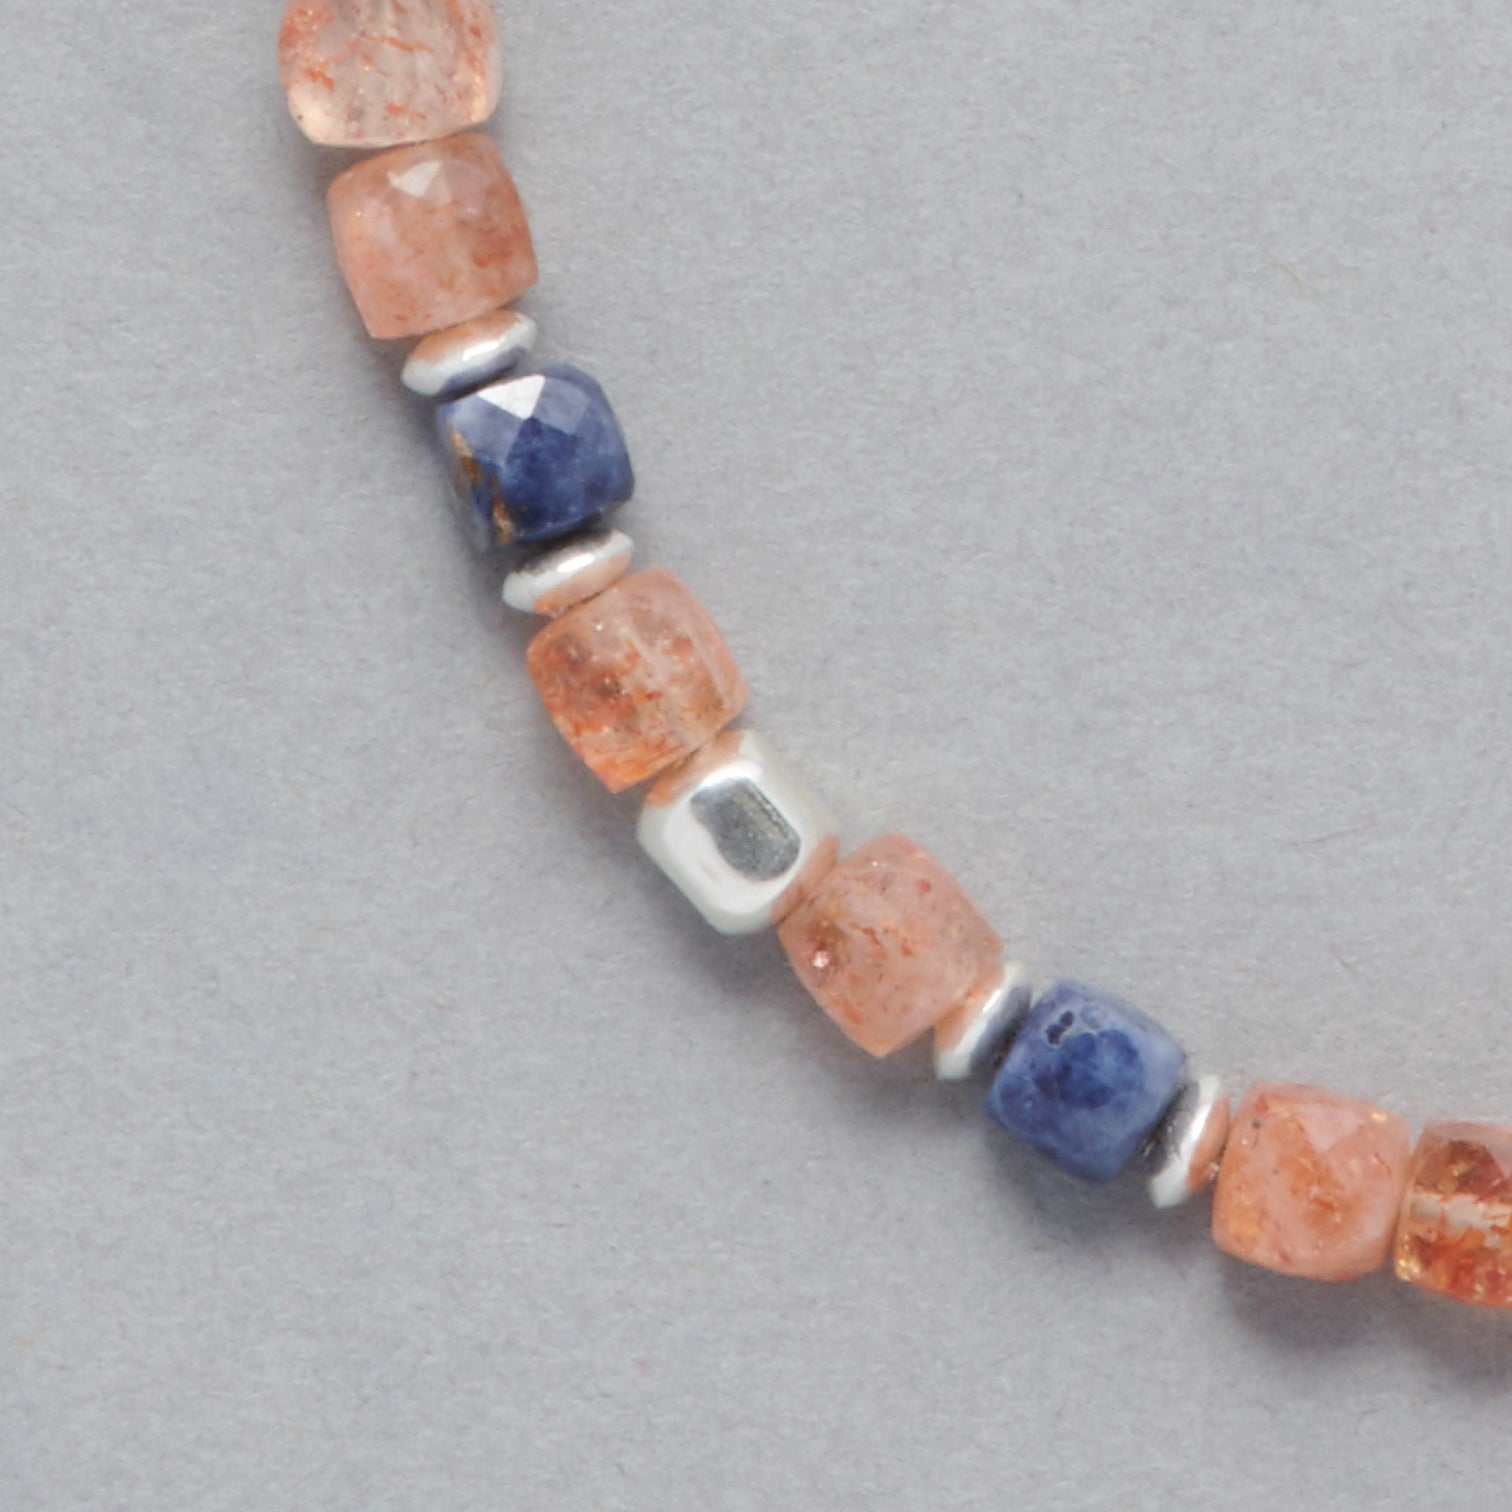 Detail shot of the Ginger Bracelet made with faceted square Sunstones, faceted square Sapphires and Sterling Silver elements. 